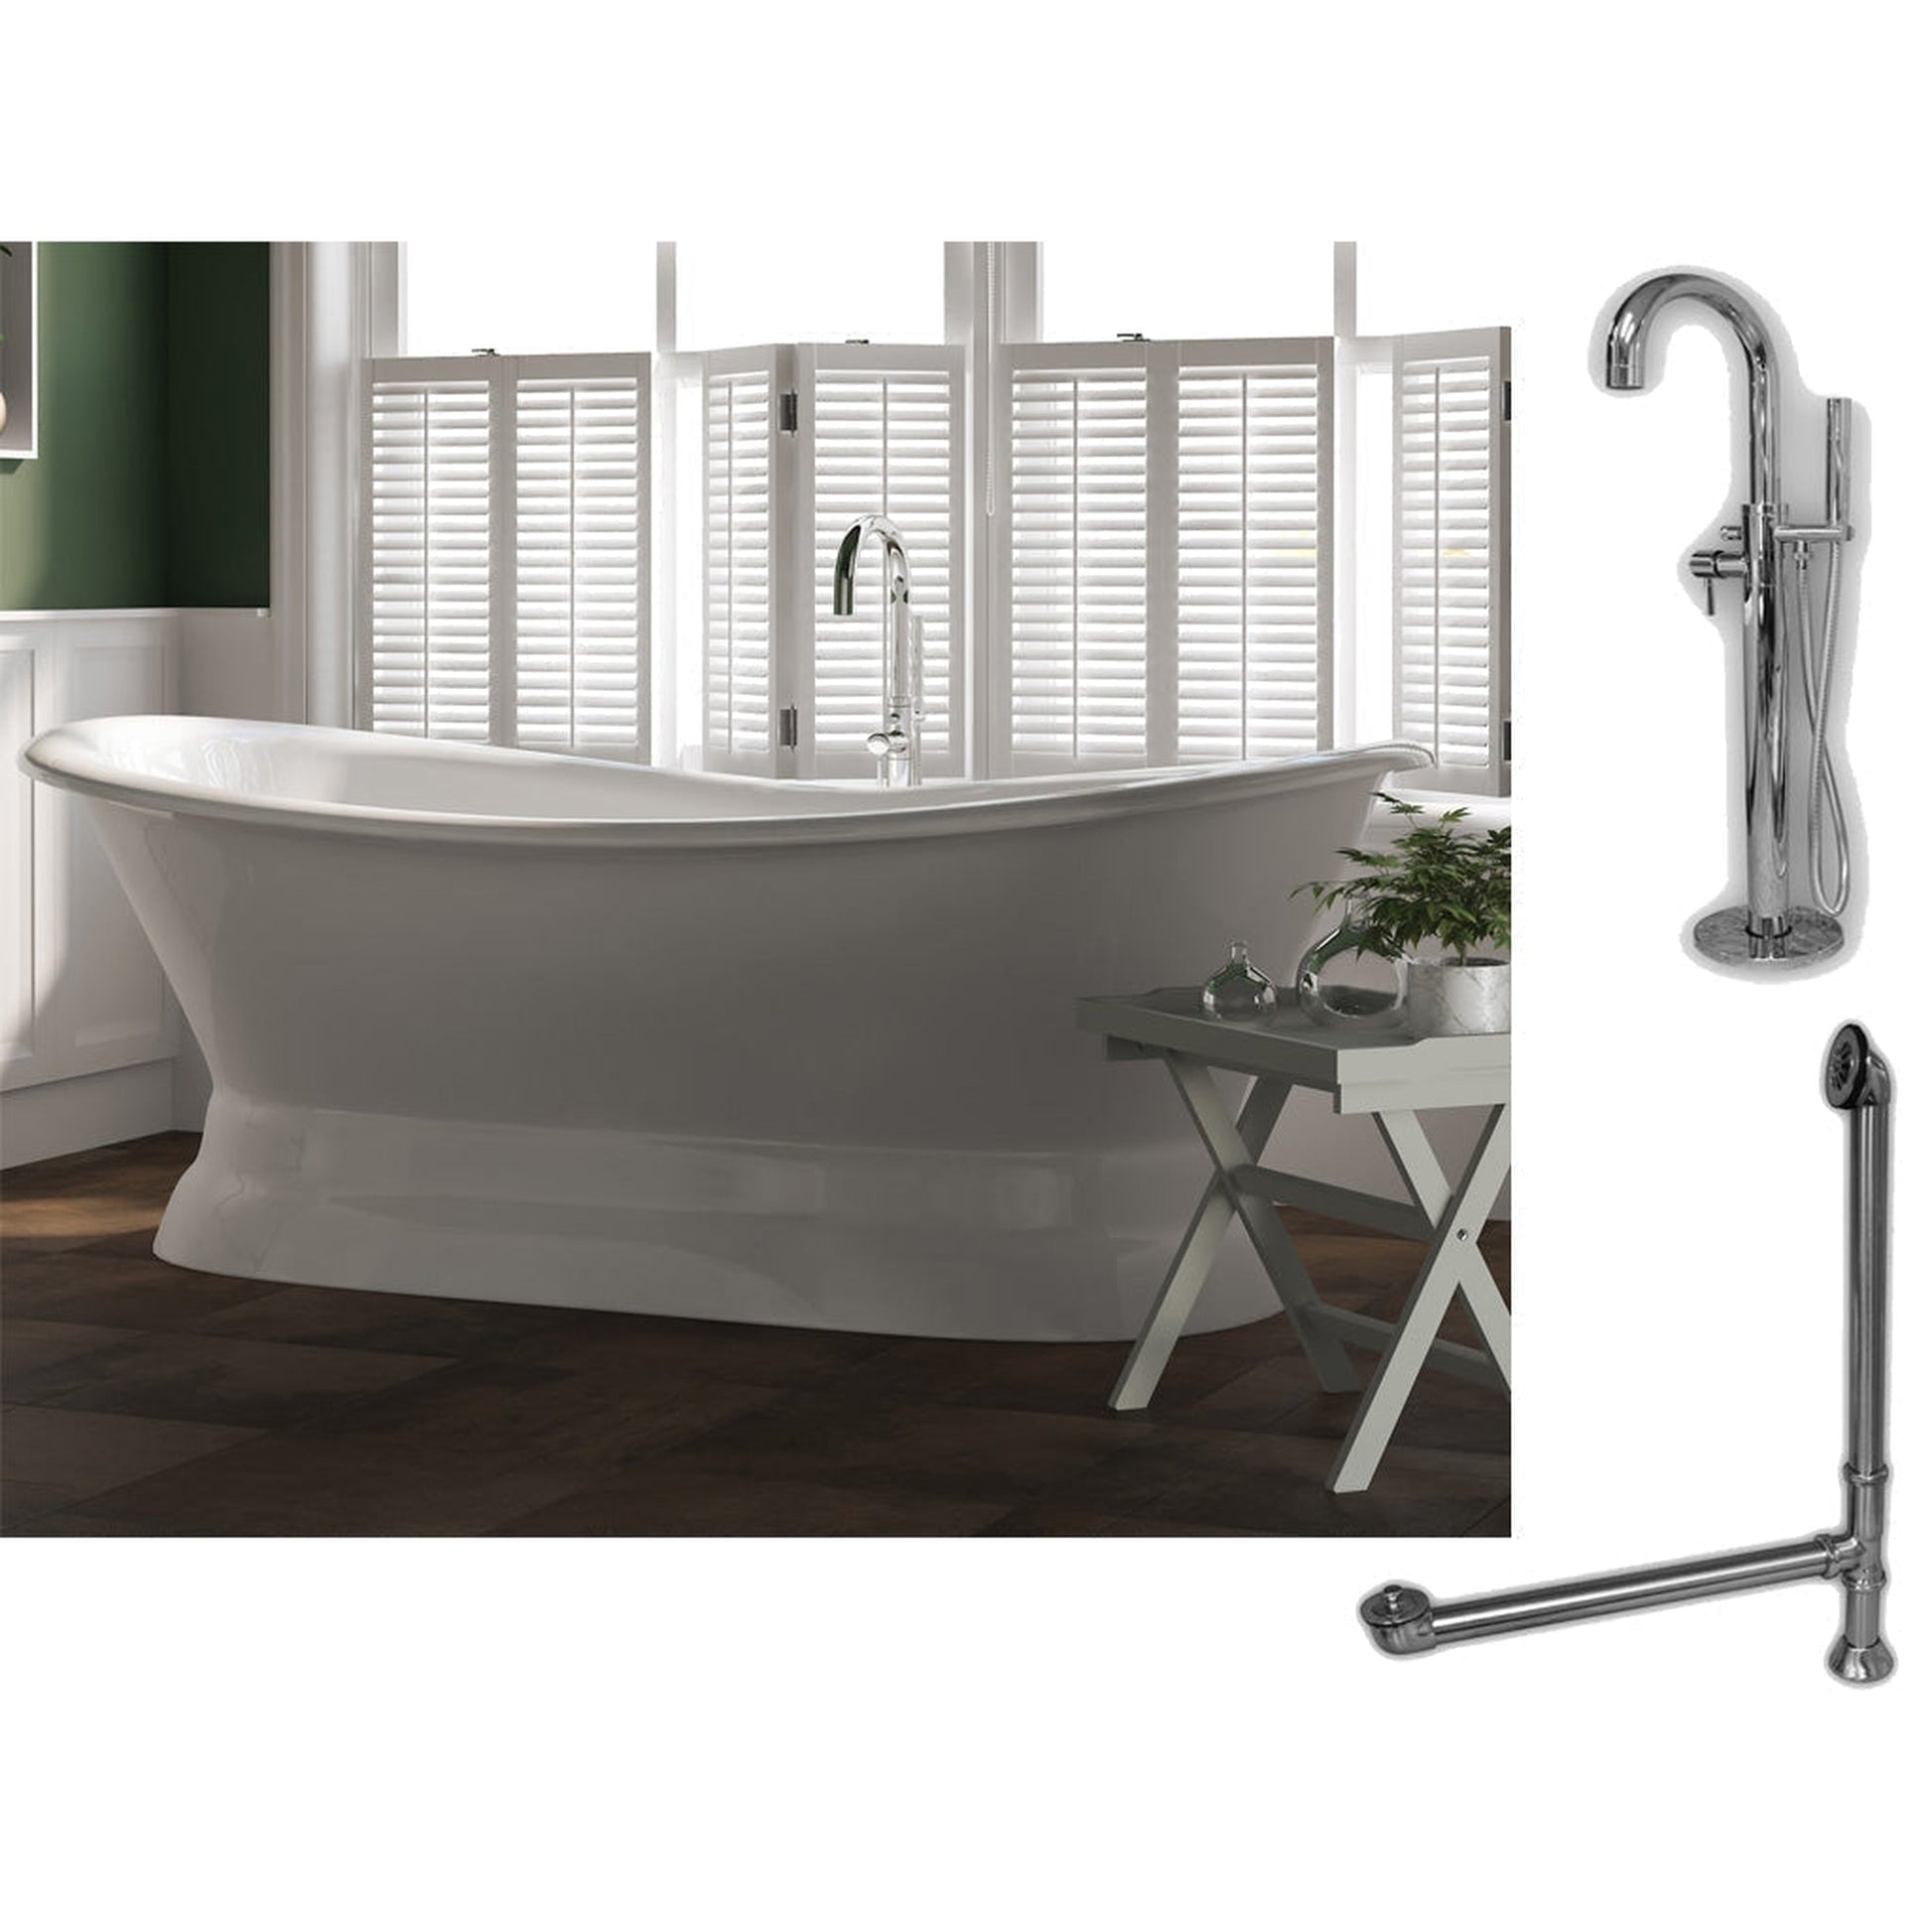 Cambridge Plumbing 71" White Cast Iron Double Slipper Pedestal Bathtub With No Faucet Holes And Complete Plumbing Package Including Modern Floor Mounted Faucet, Drain And Overflow Assembly In Polished Chrome